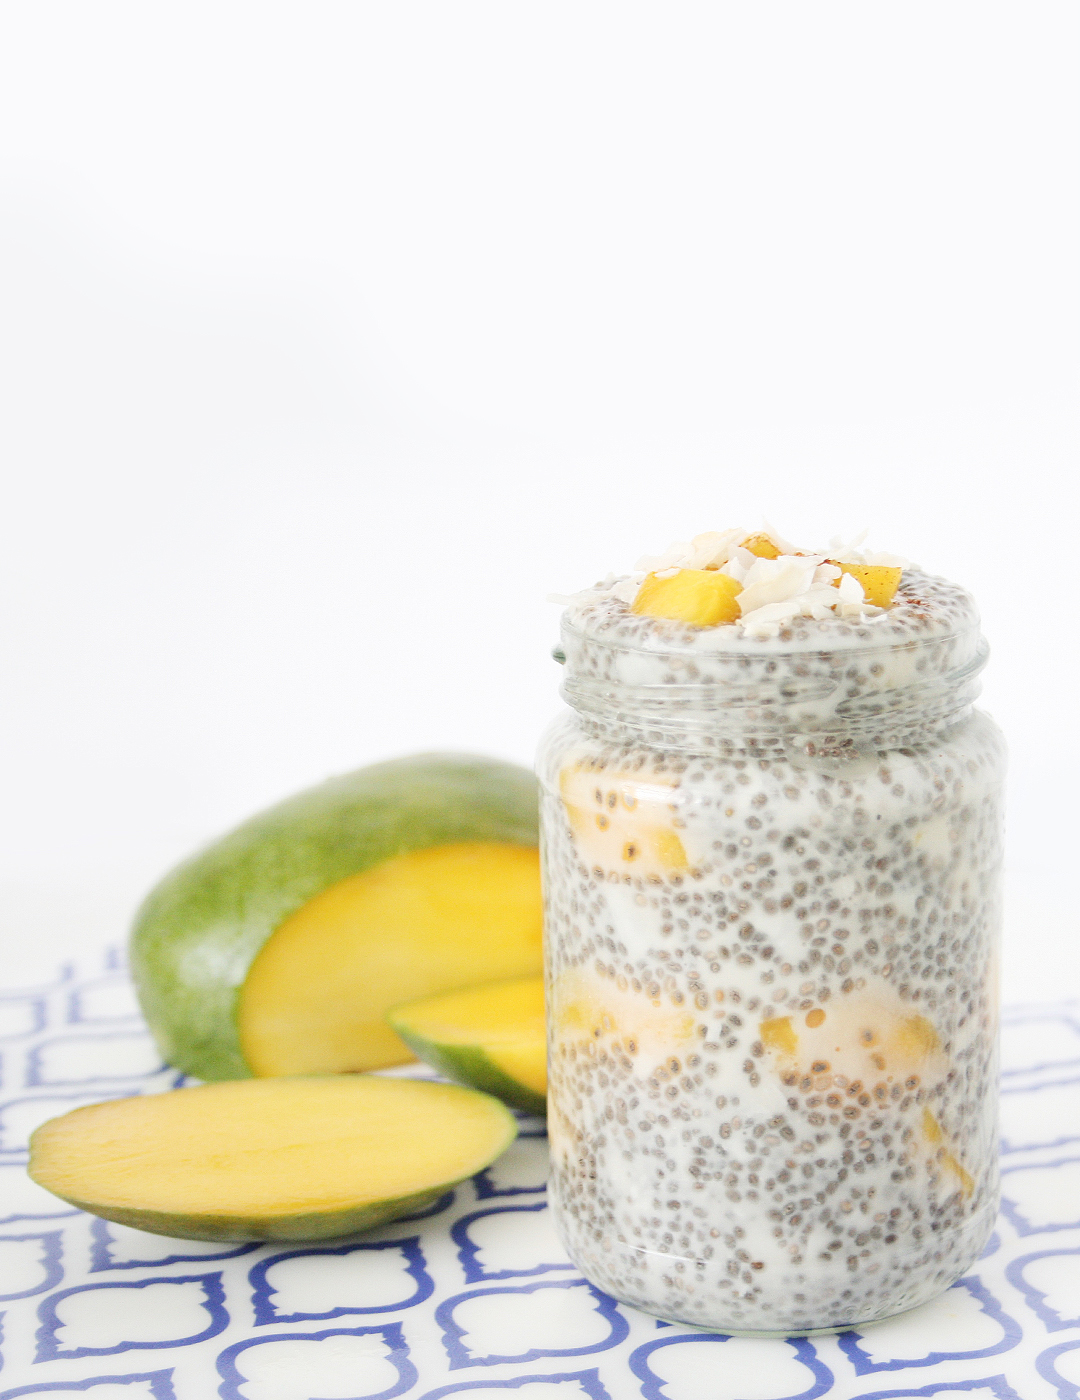 Overnight Mango and Coconut Chia Seed Pudding